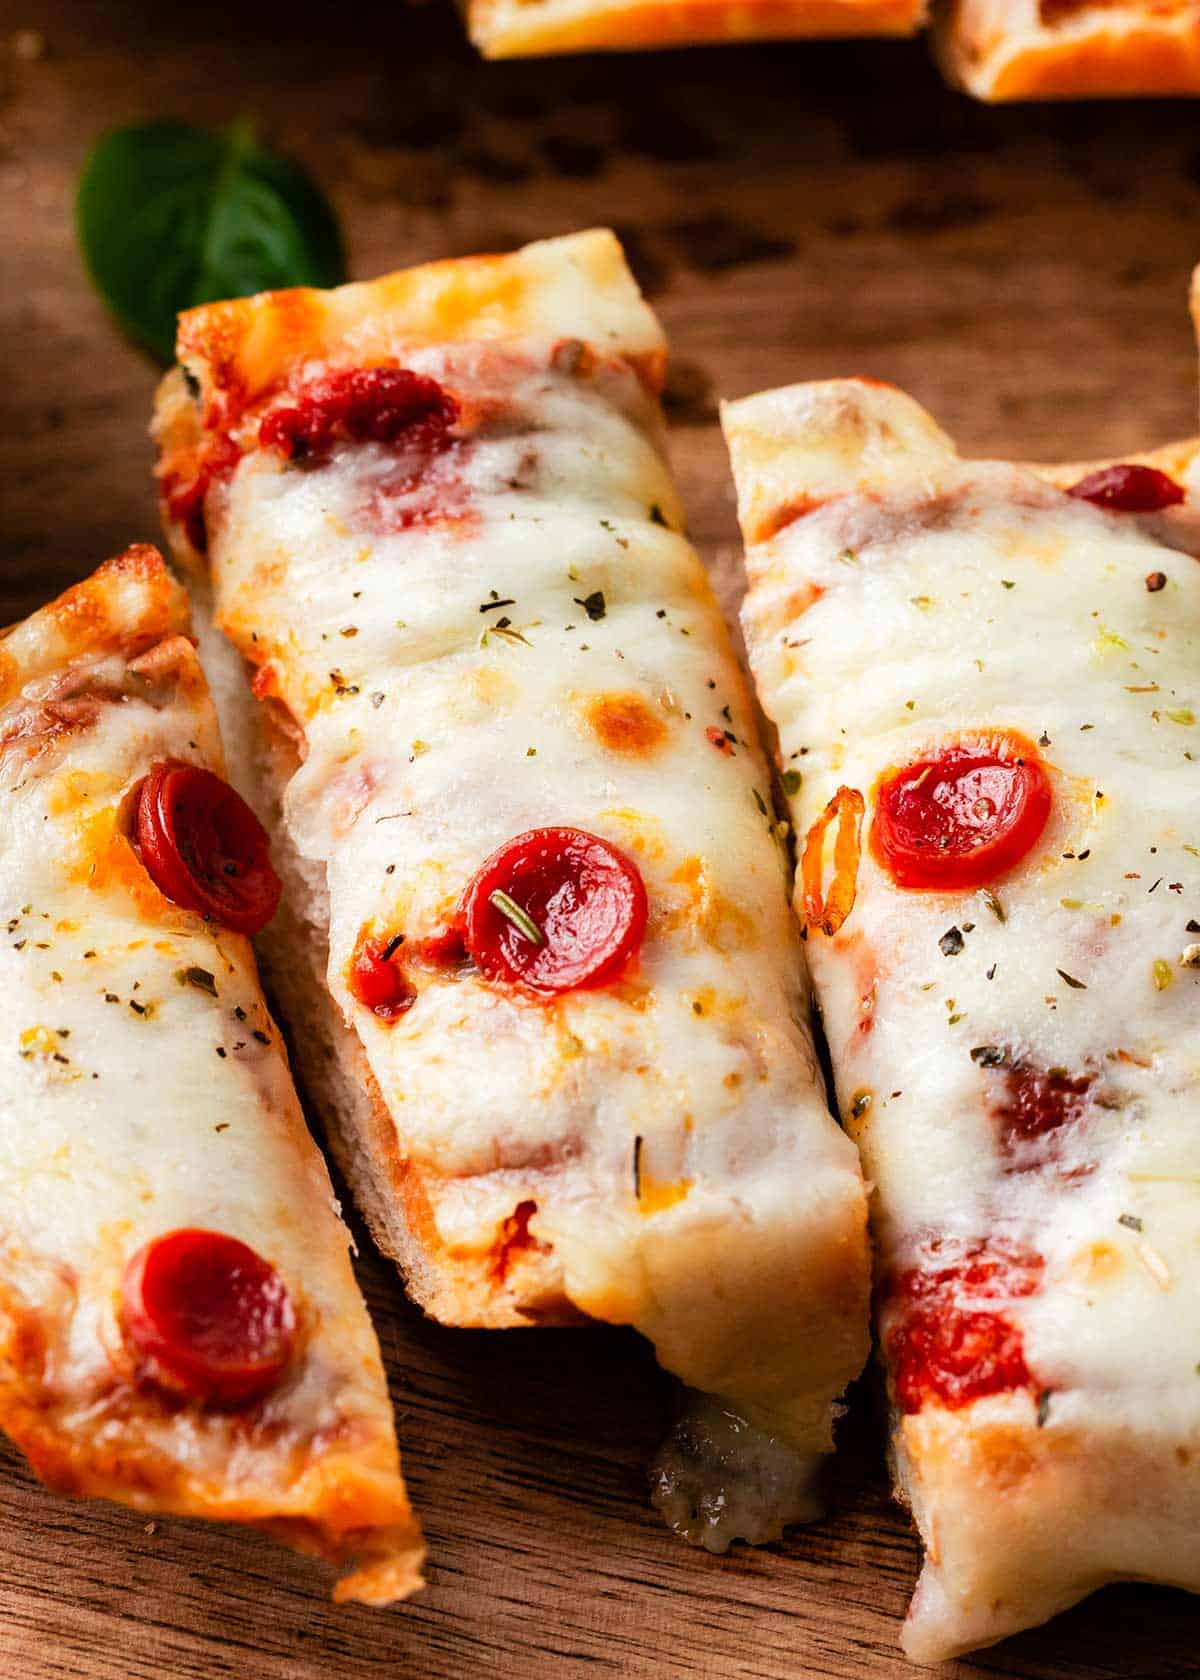 Slice of french bread pizza.